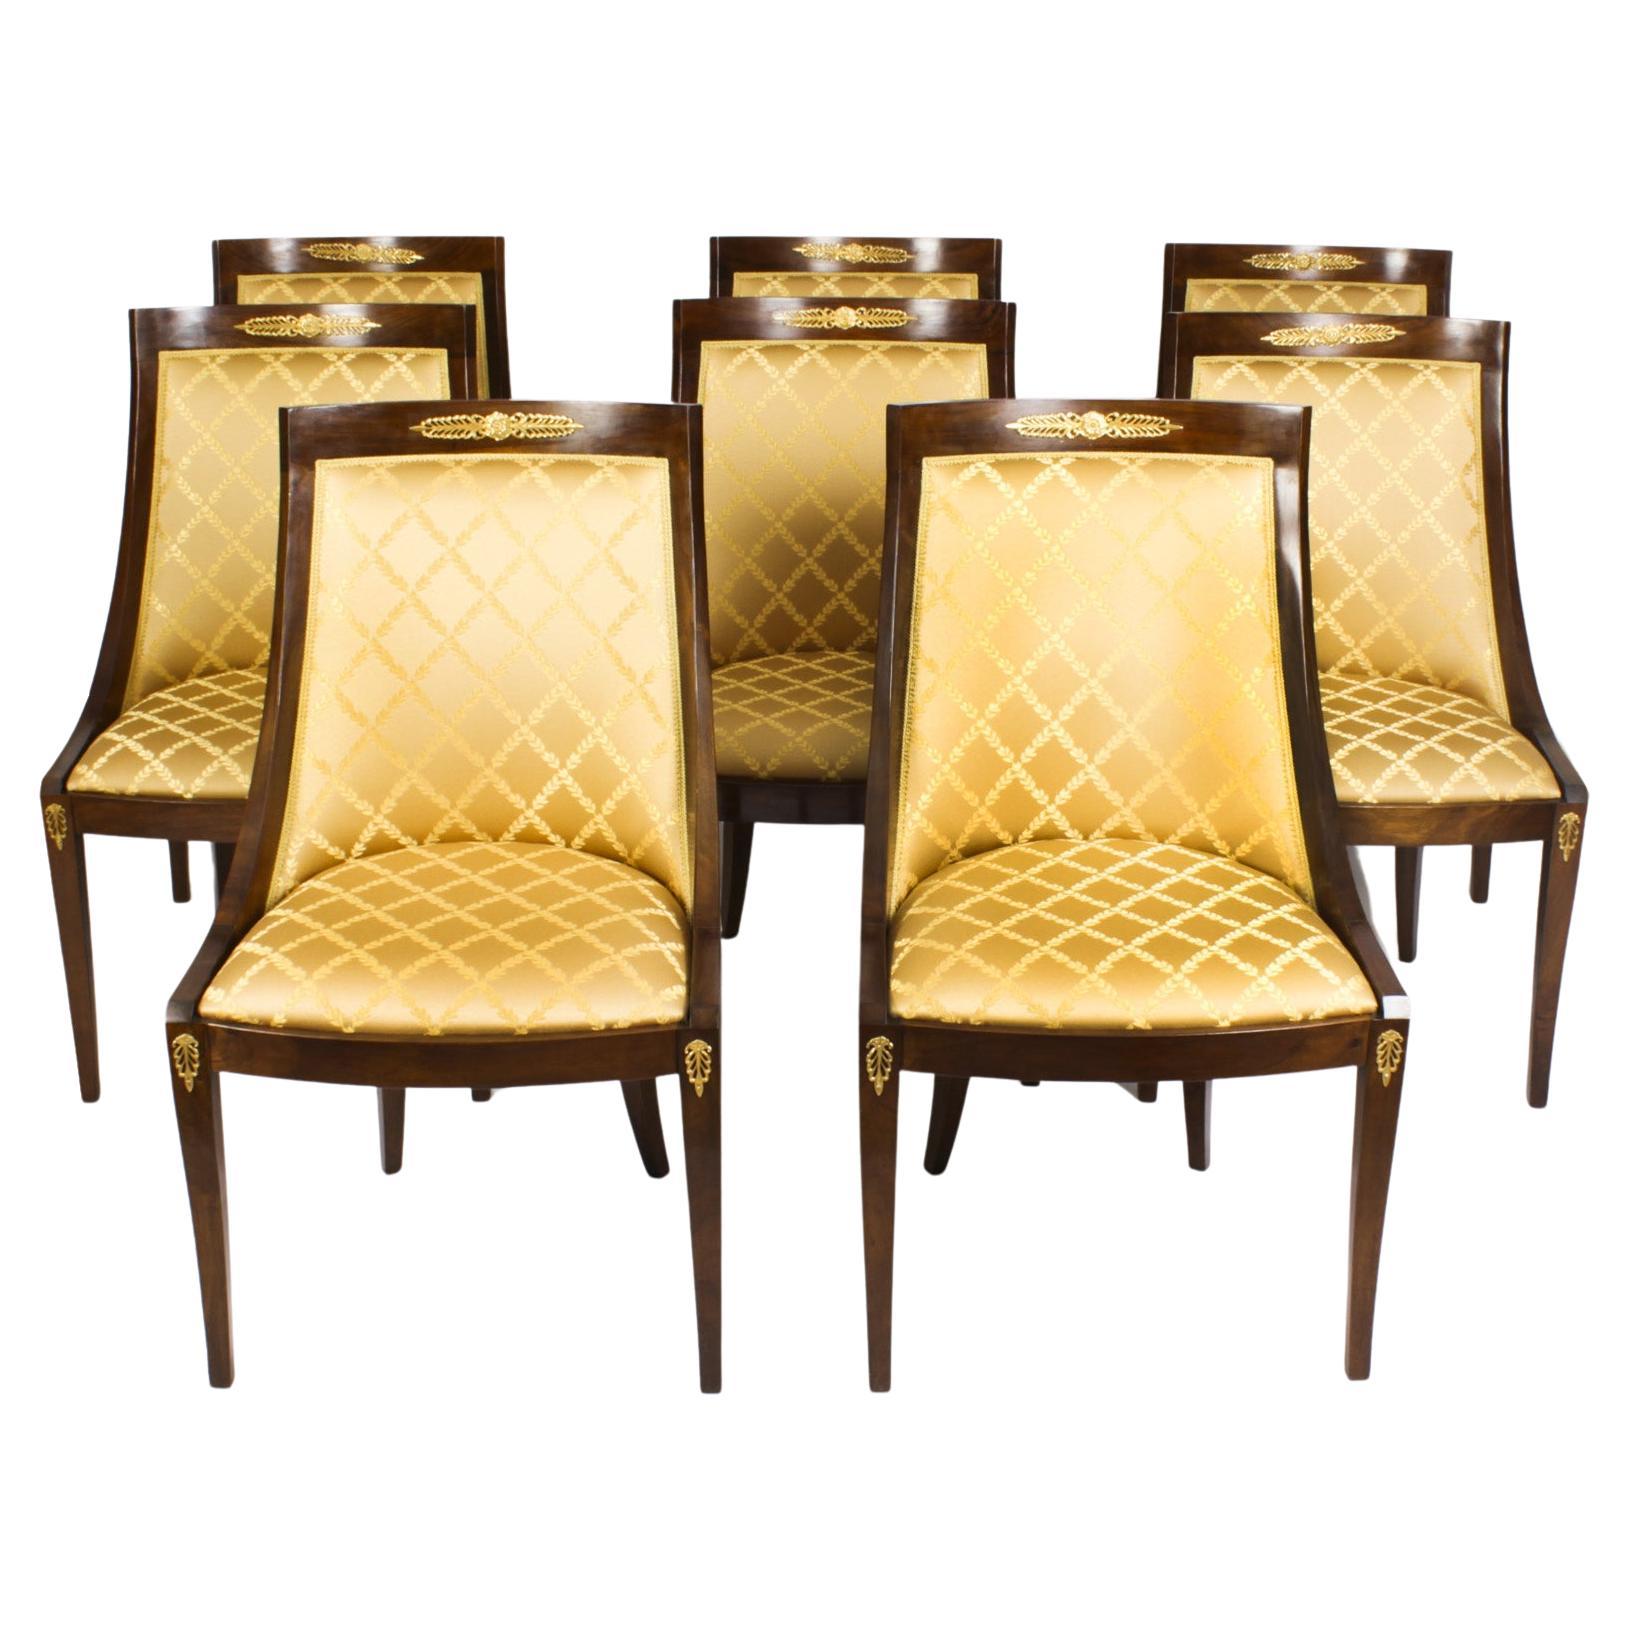 Empire Revival Dining Room Chairs